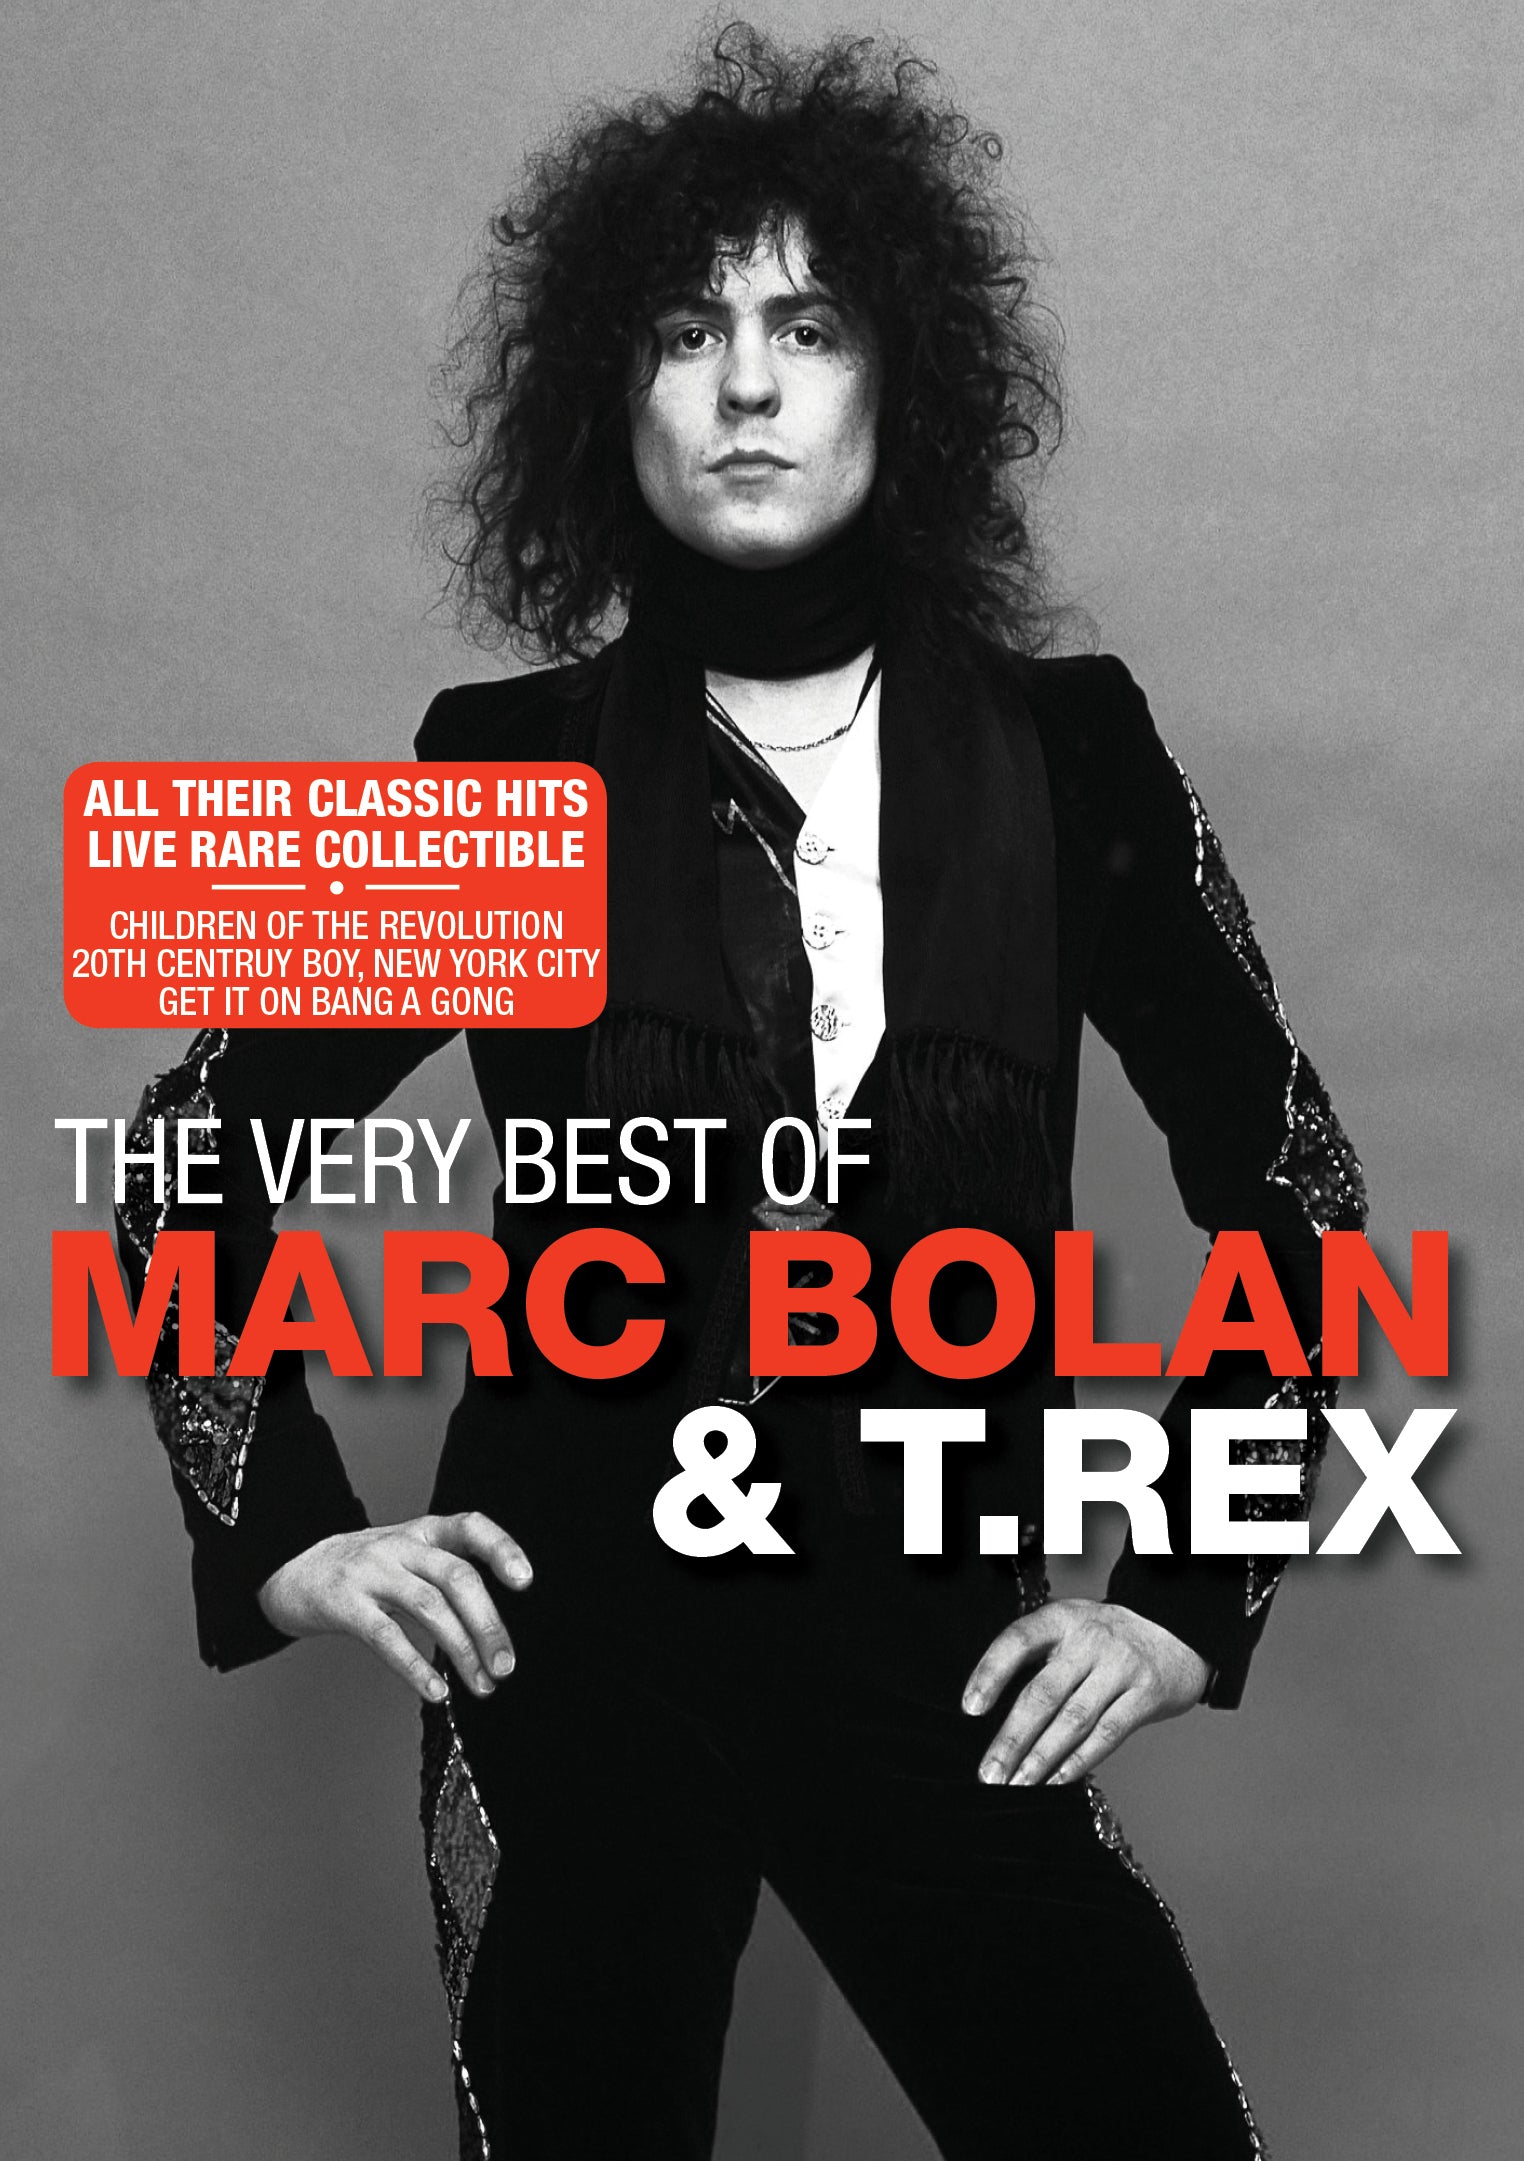 MARC BOLAN & T.REX  - THE VERY BEST OF MARC BOLAN & T.REX